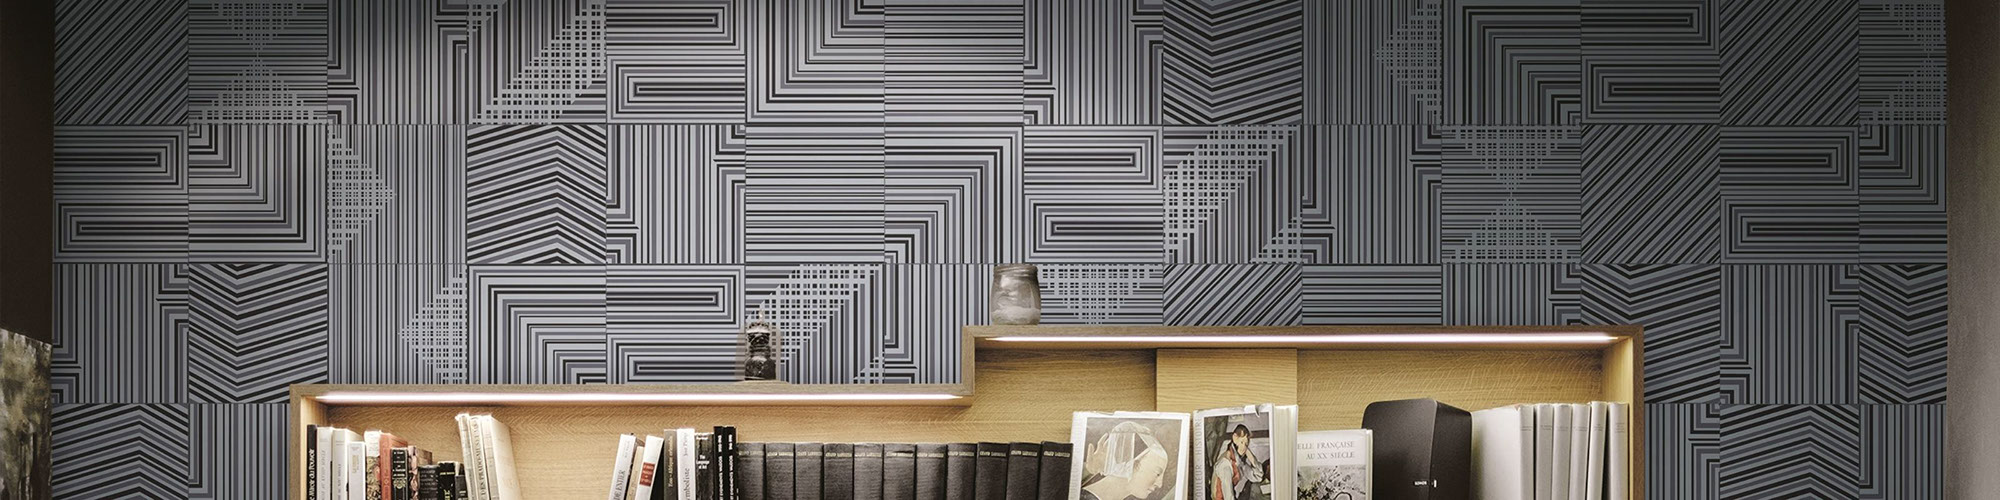 Metallic-look, geometric pattern tile on a library wall and light wood bookshelves with books.